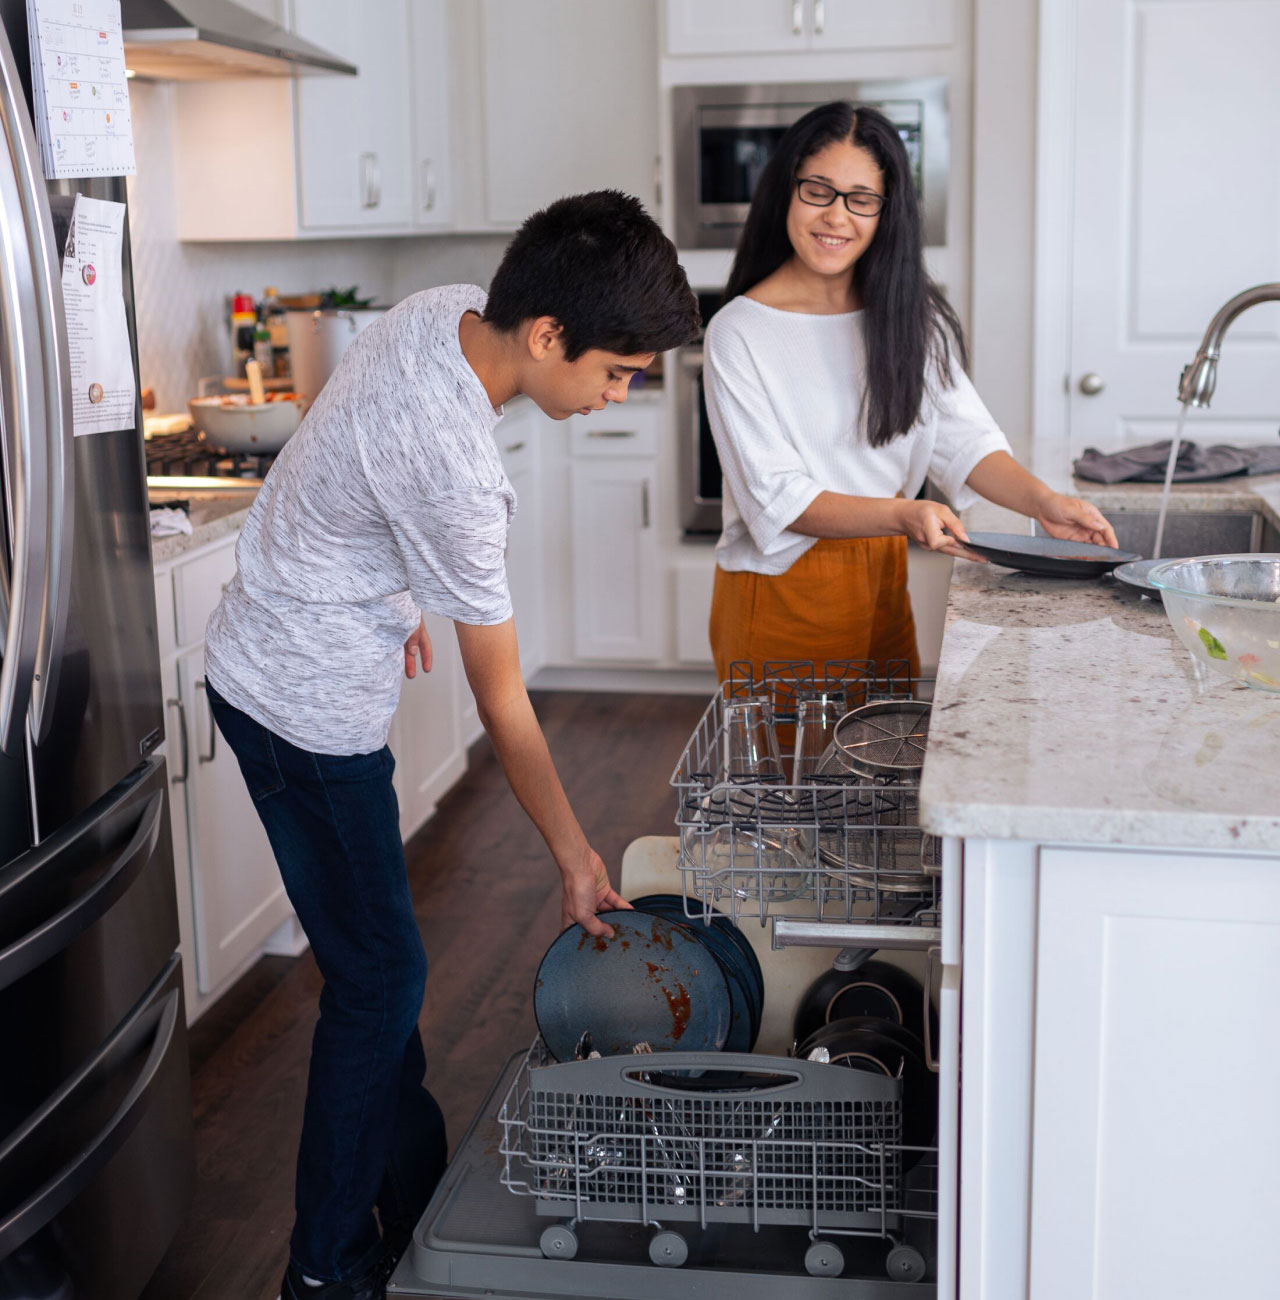 Dishwasher warranty and protection plan